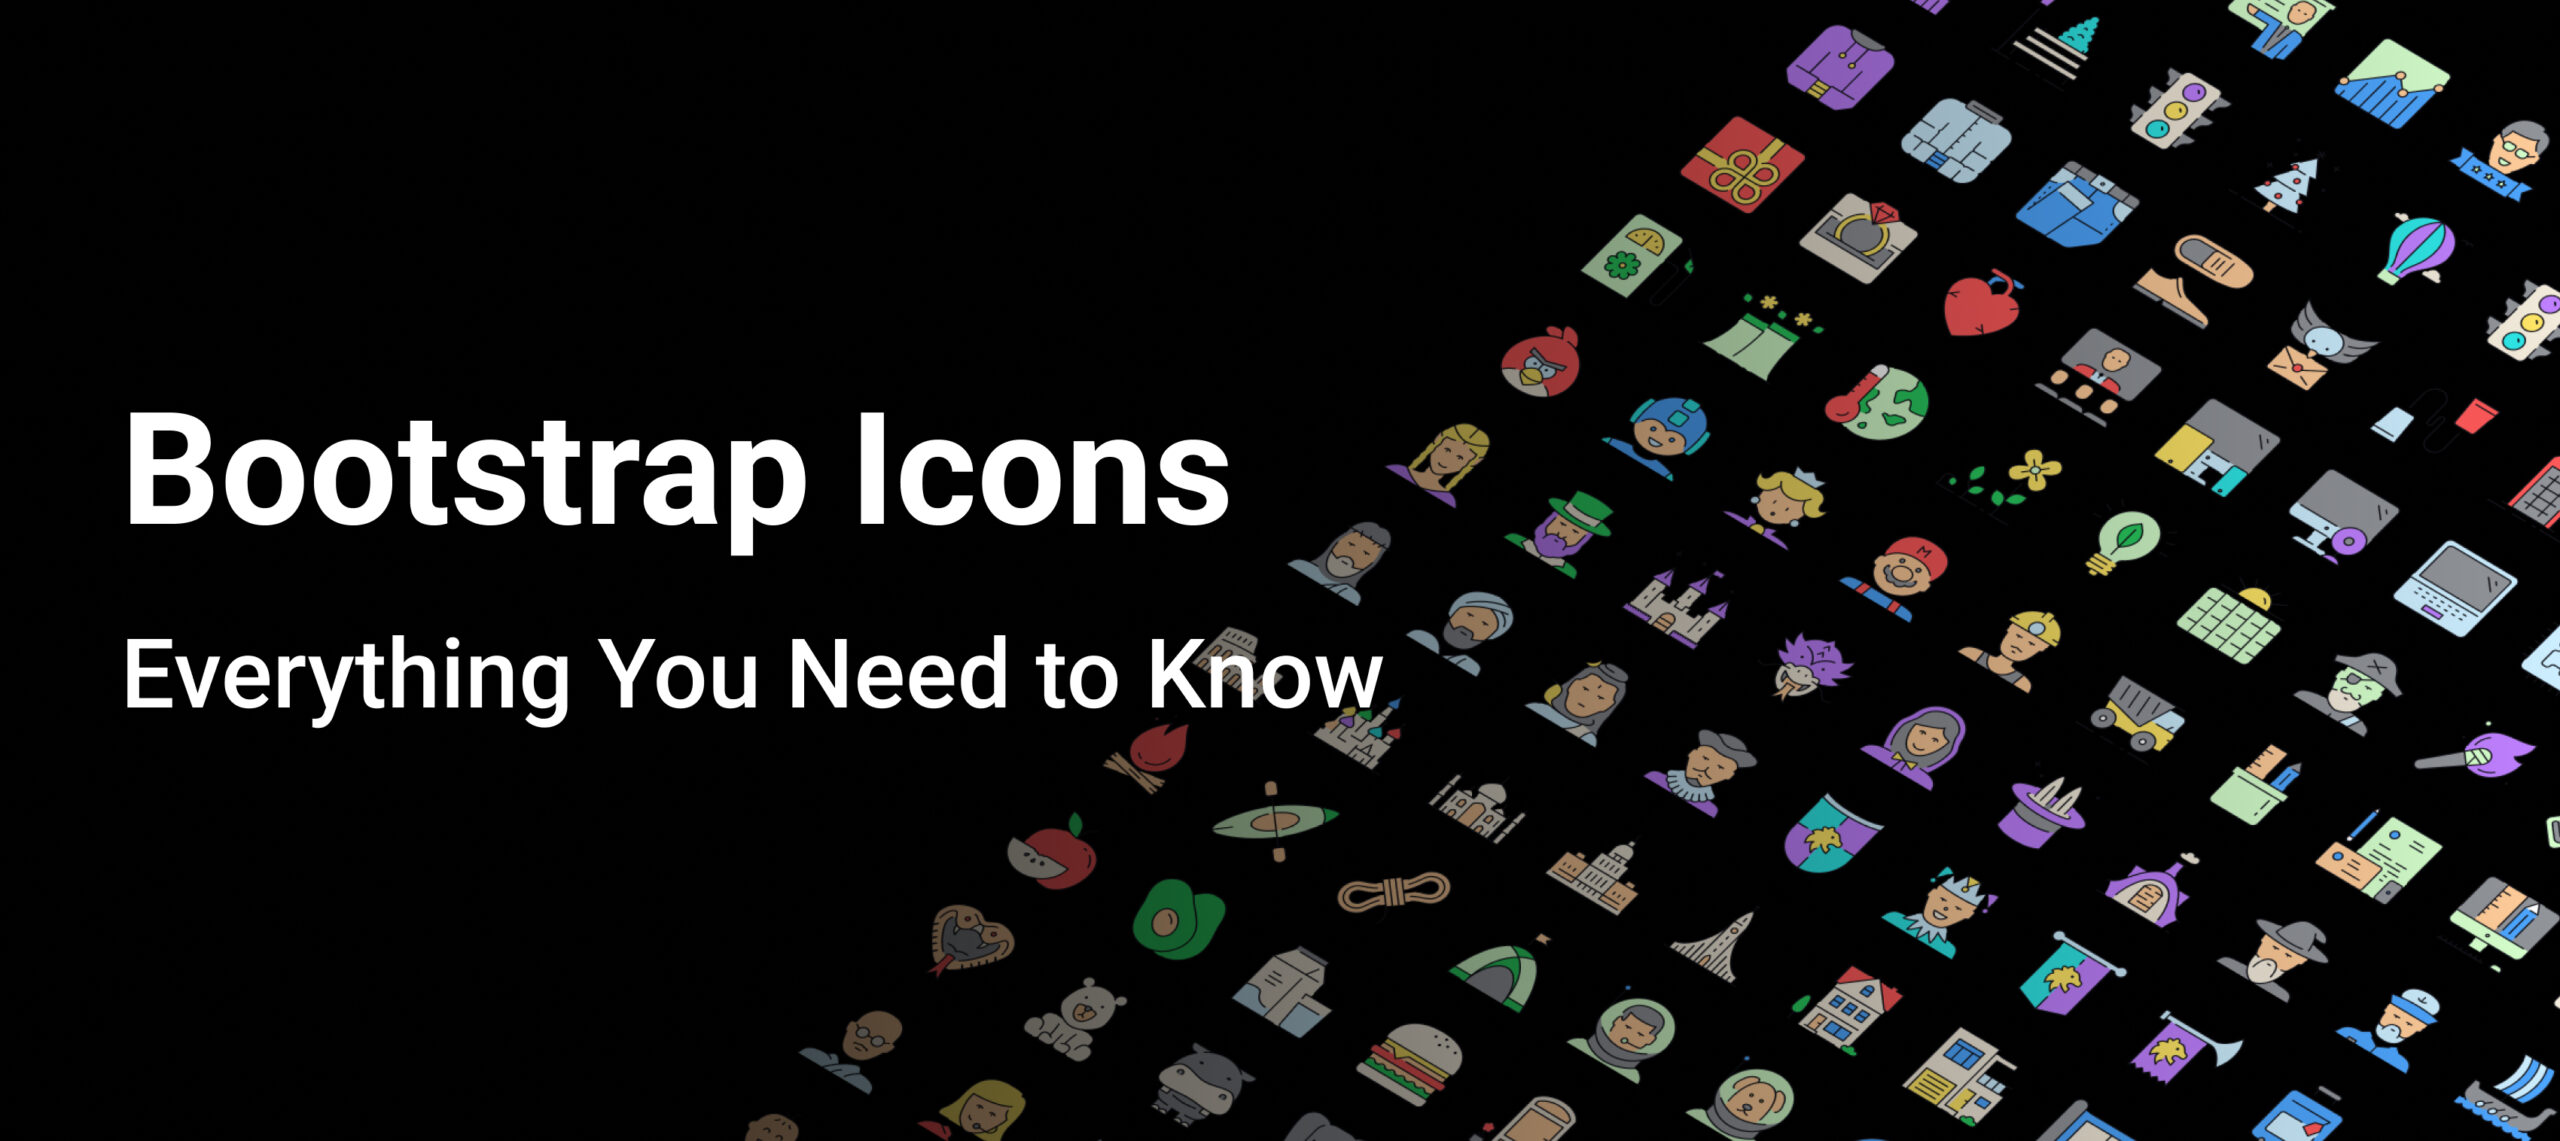  Bootstrap Icons; Everything You Need to Know